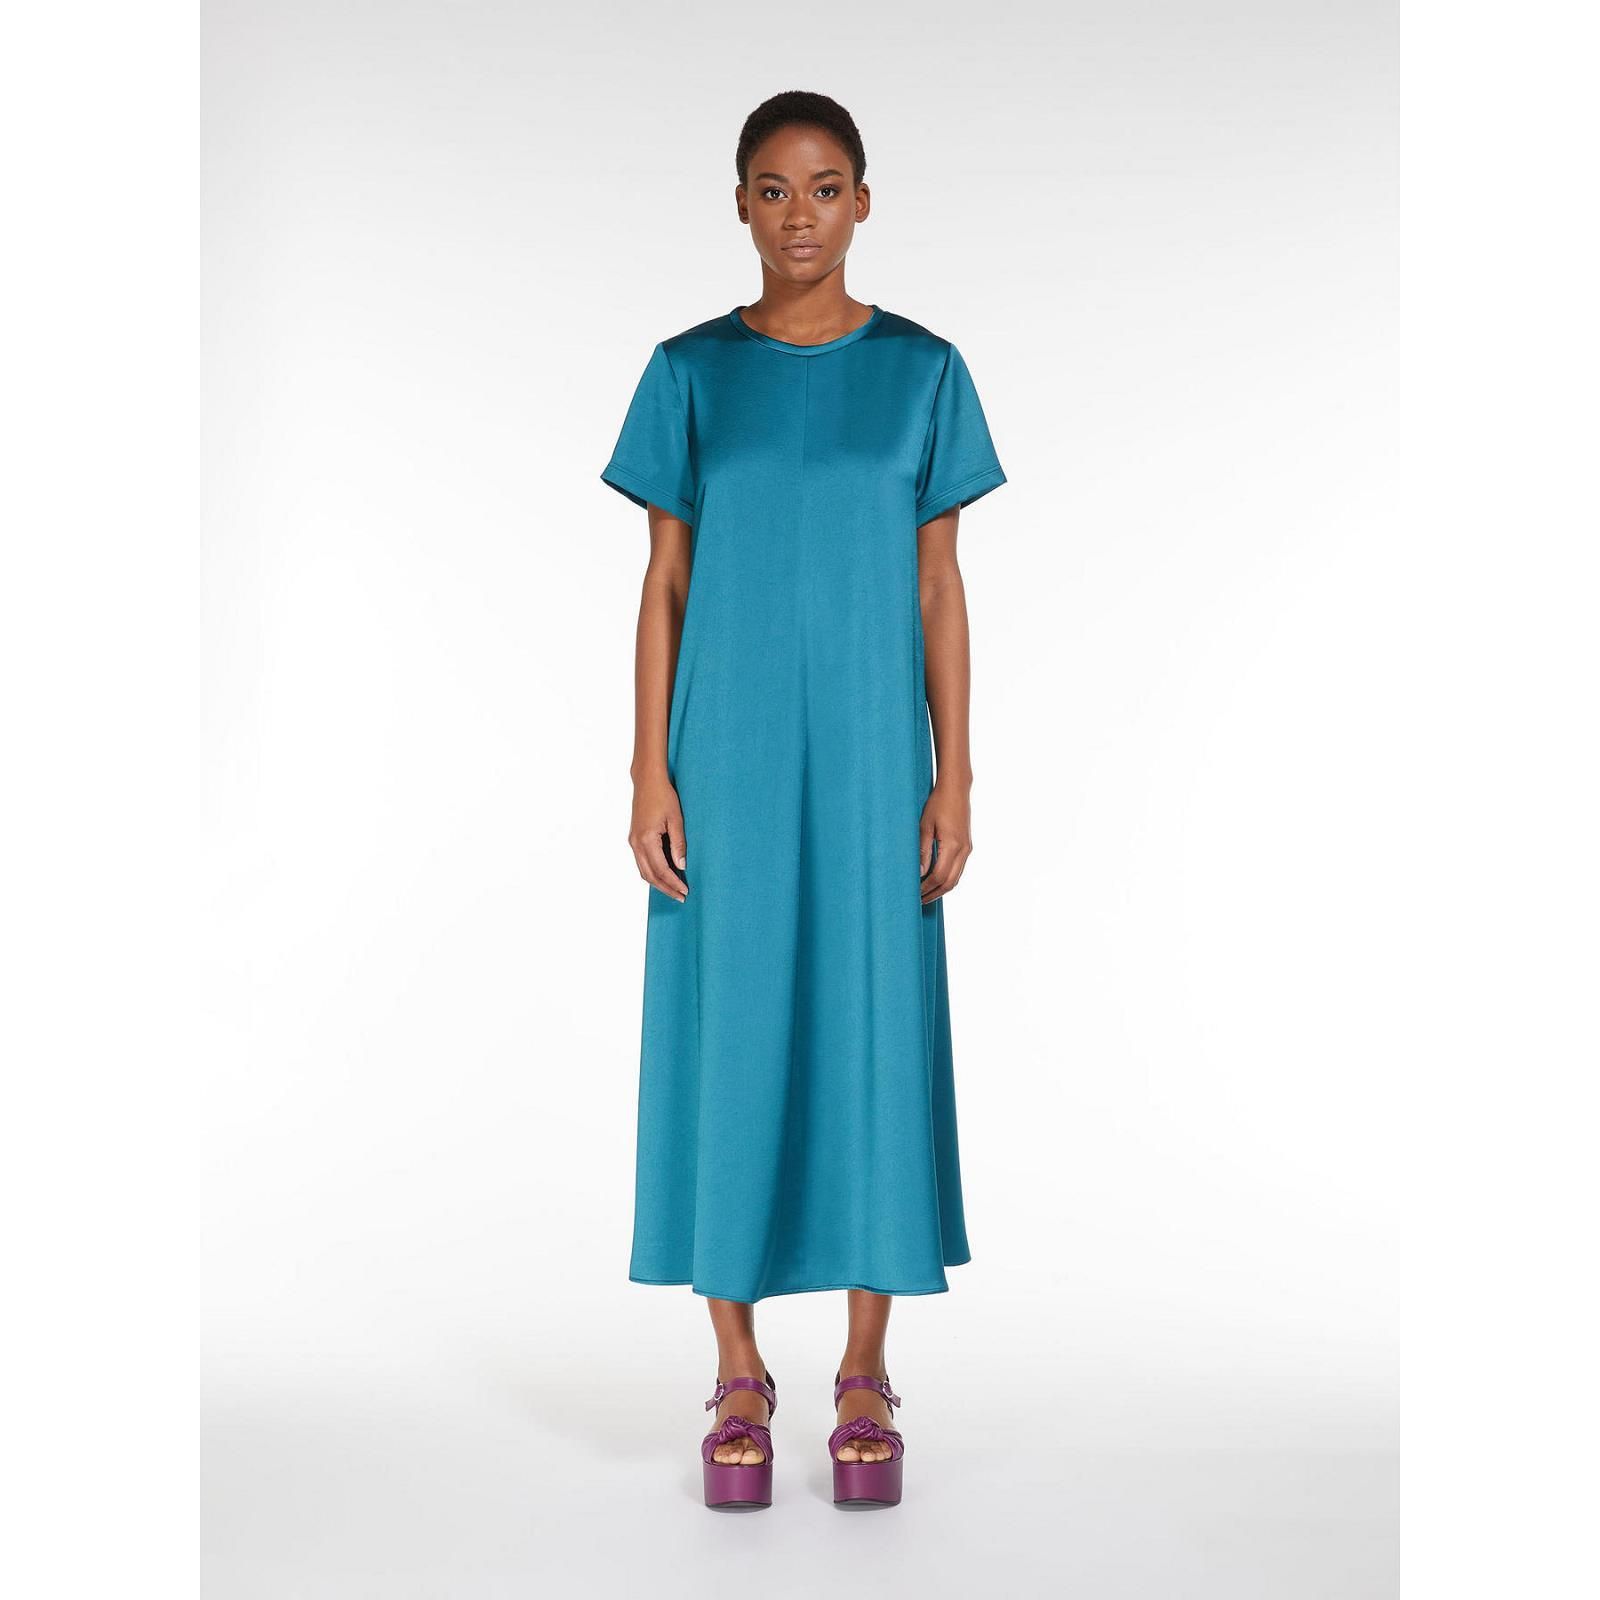 Robe turquoise satinée 